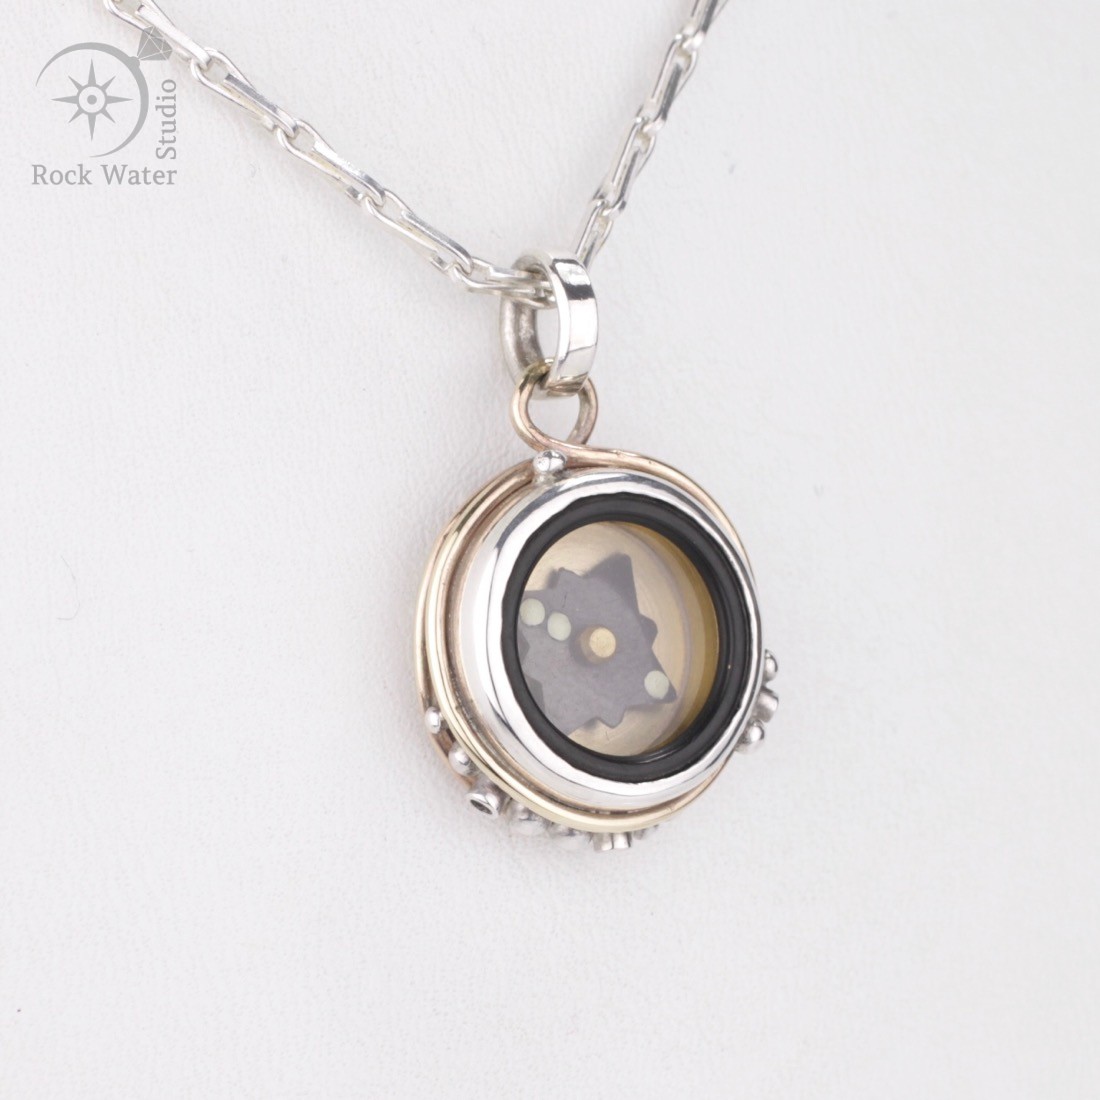 Working Compass Necklace Gift (g421)